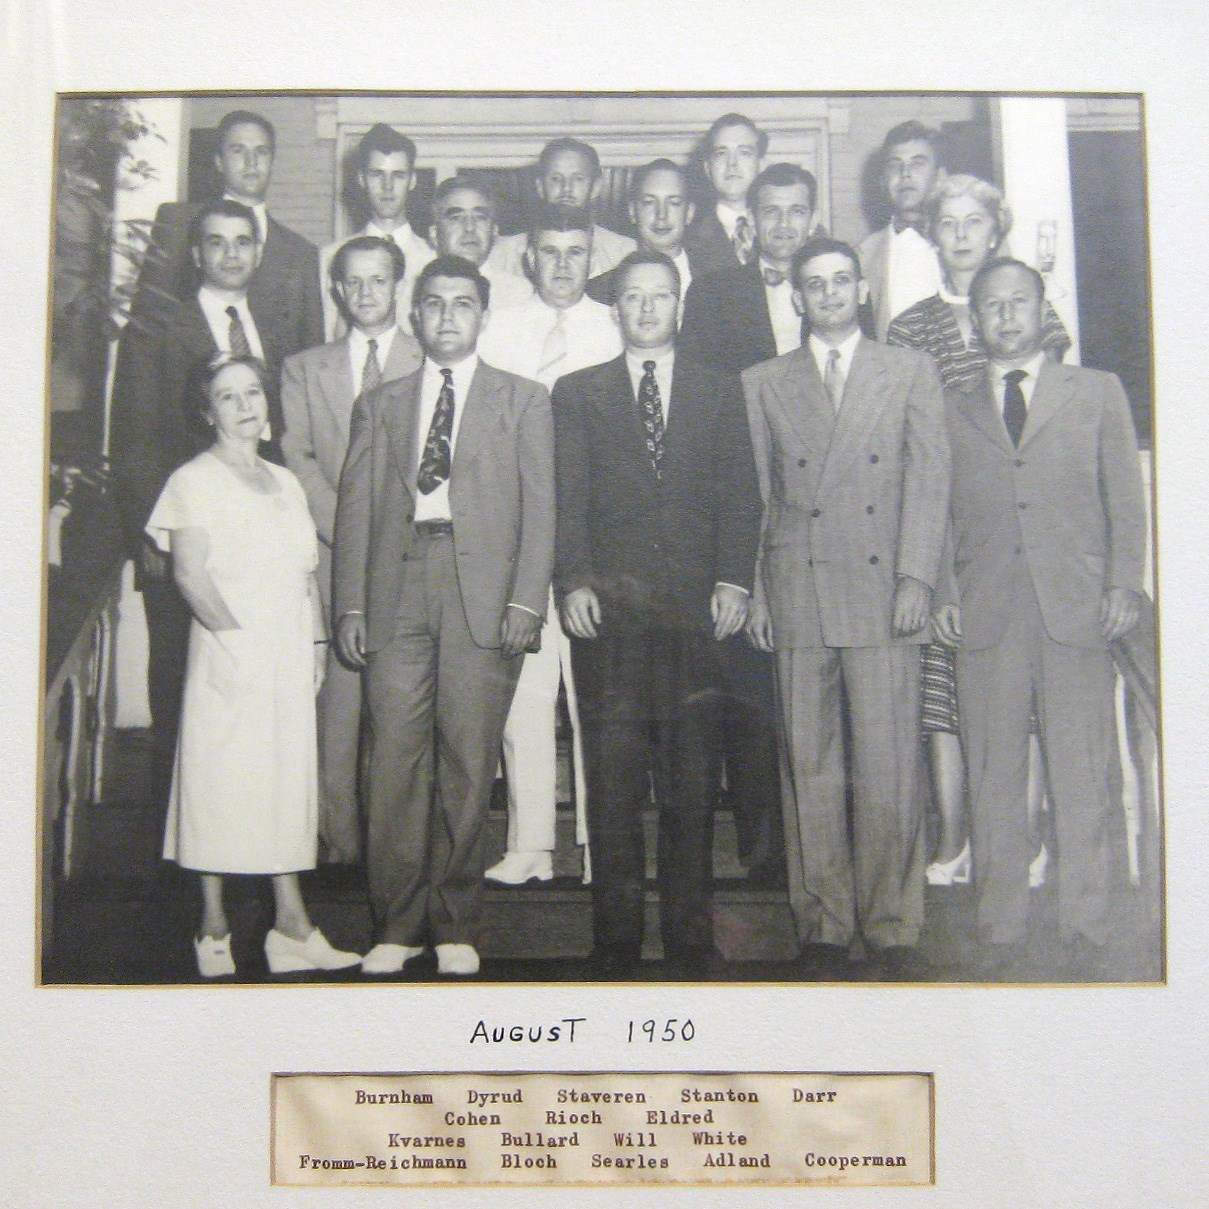 Four rows of people on porch of wooden building, names identified below. Fromm-Reichmann stands in front row on left, only one of  two women in the picture.